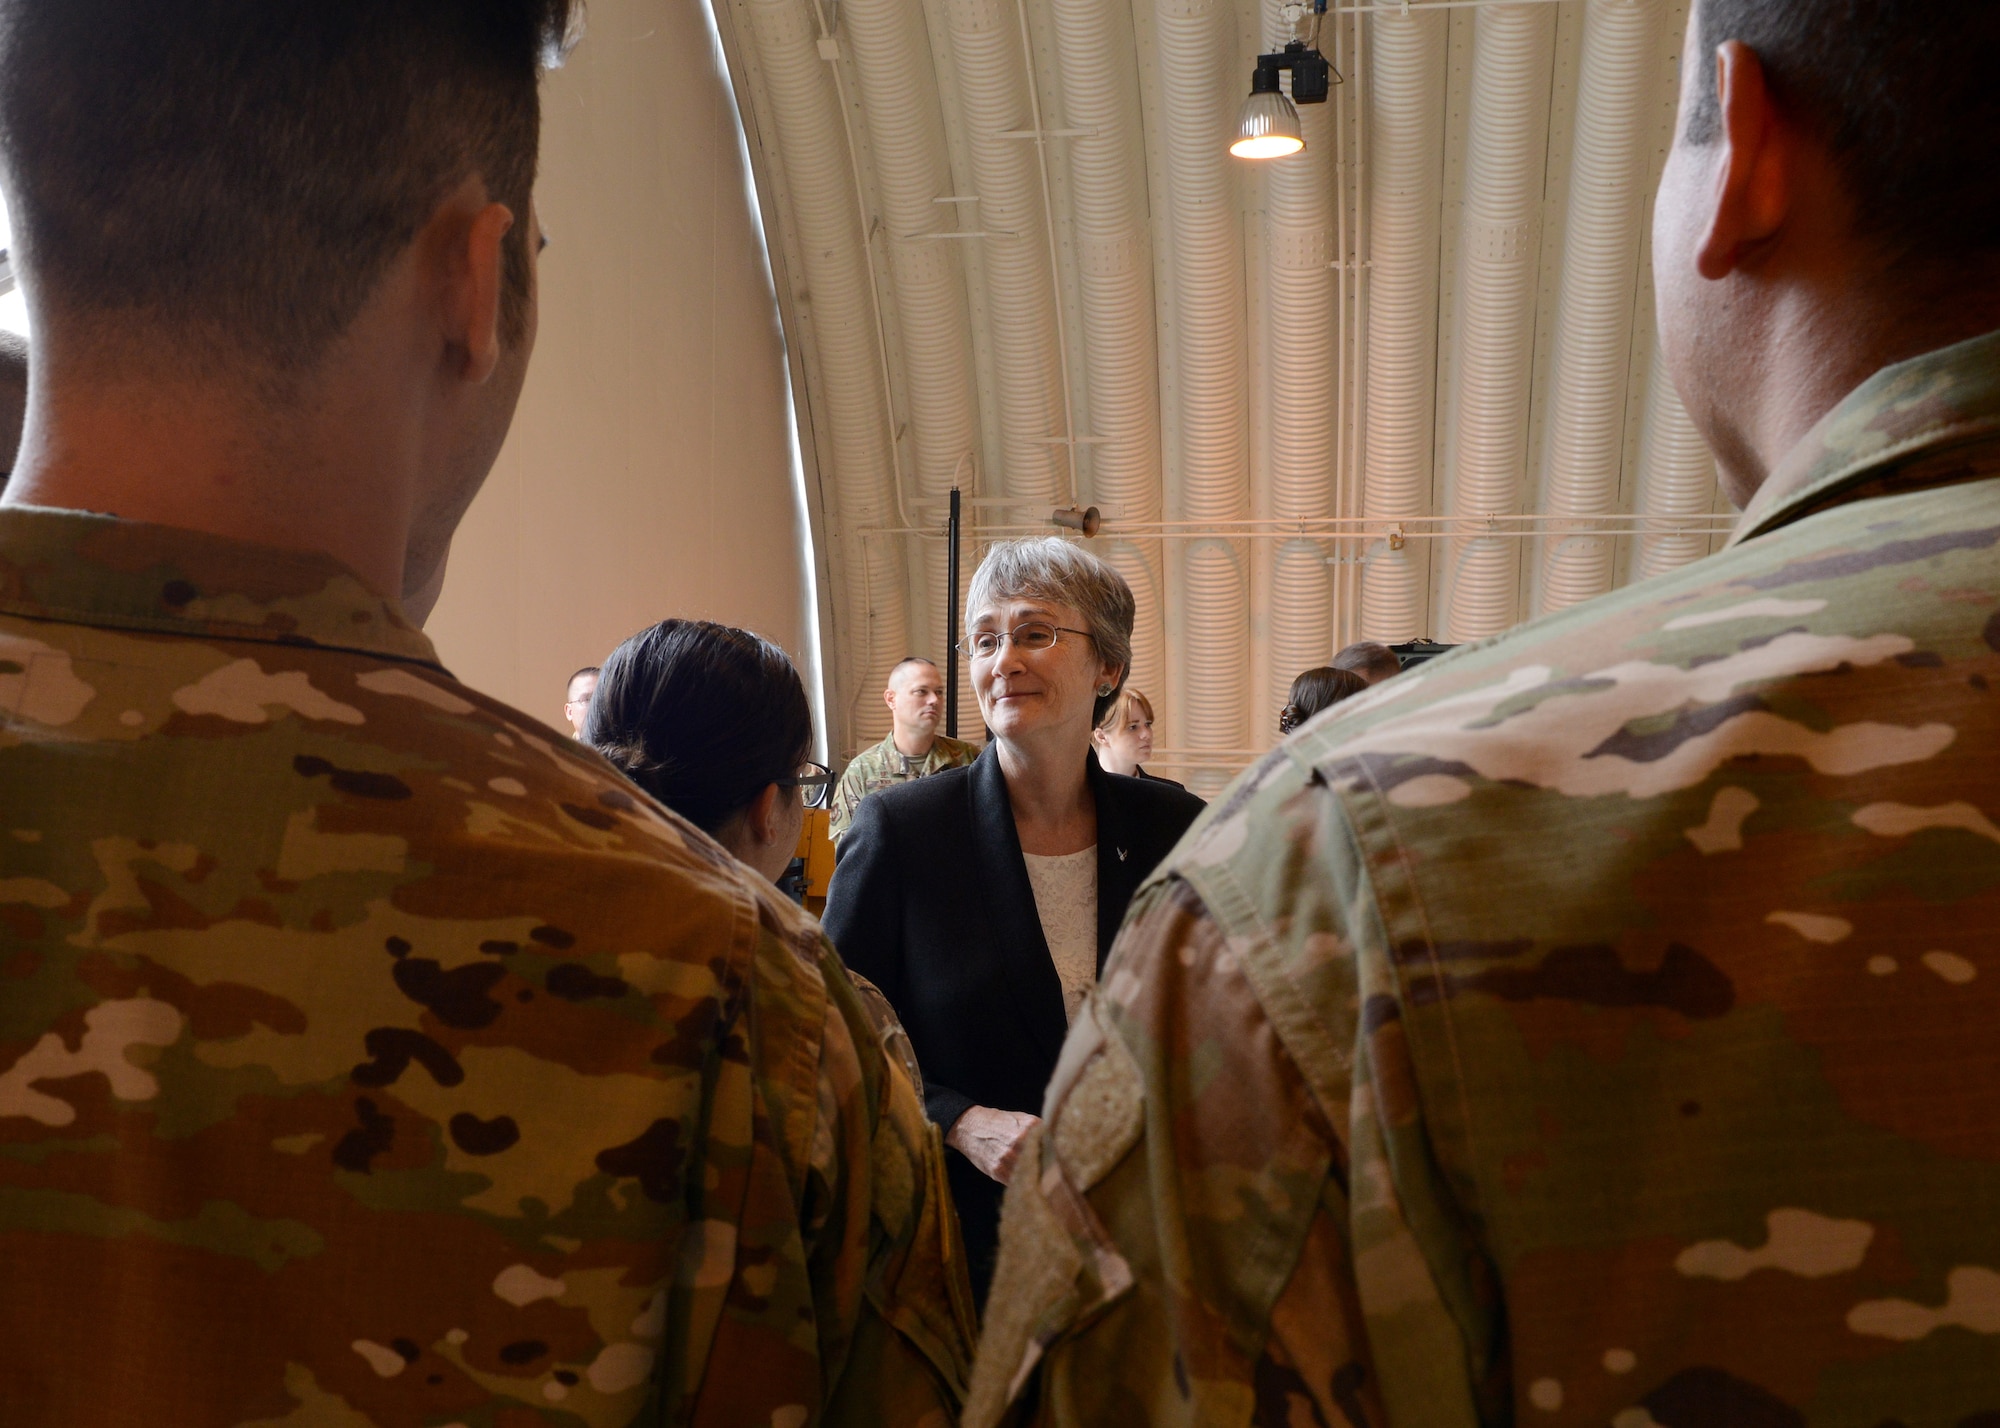 Secretary of the Air Force Heather Wilson visited with Wyvern Warriors at Aviano Air Base, Italy on April 24.